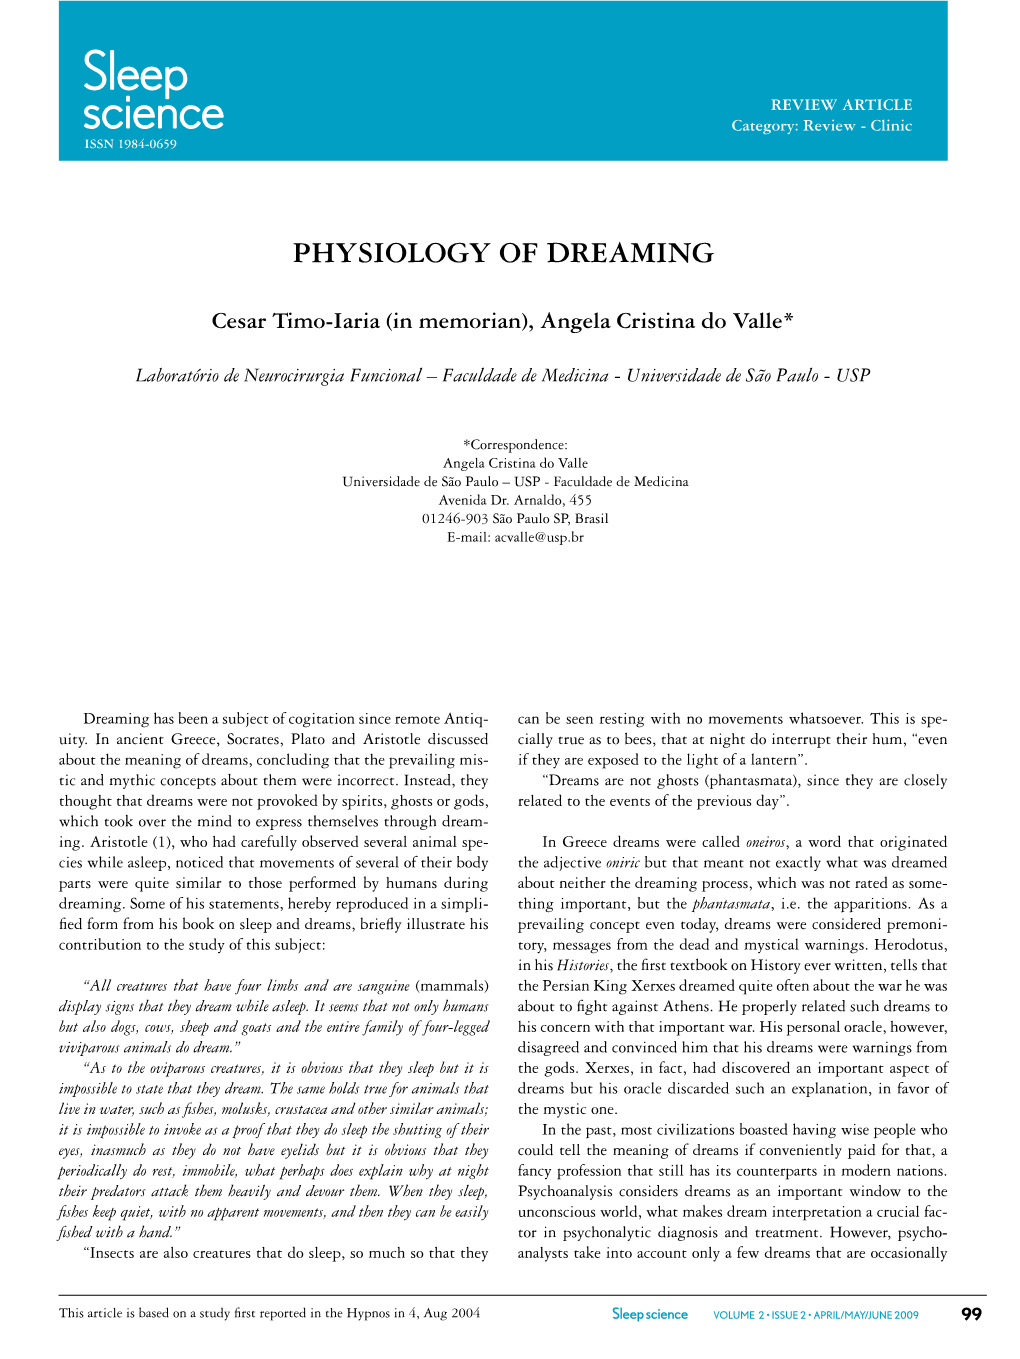 Physiology of Dreaming